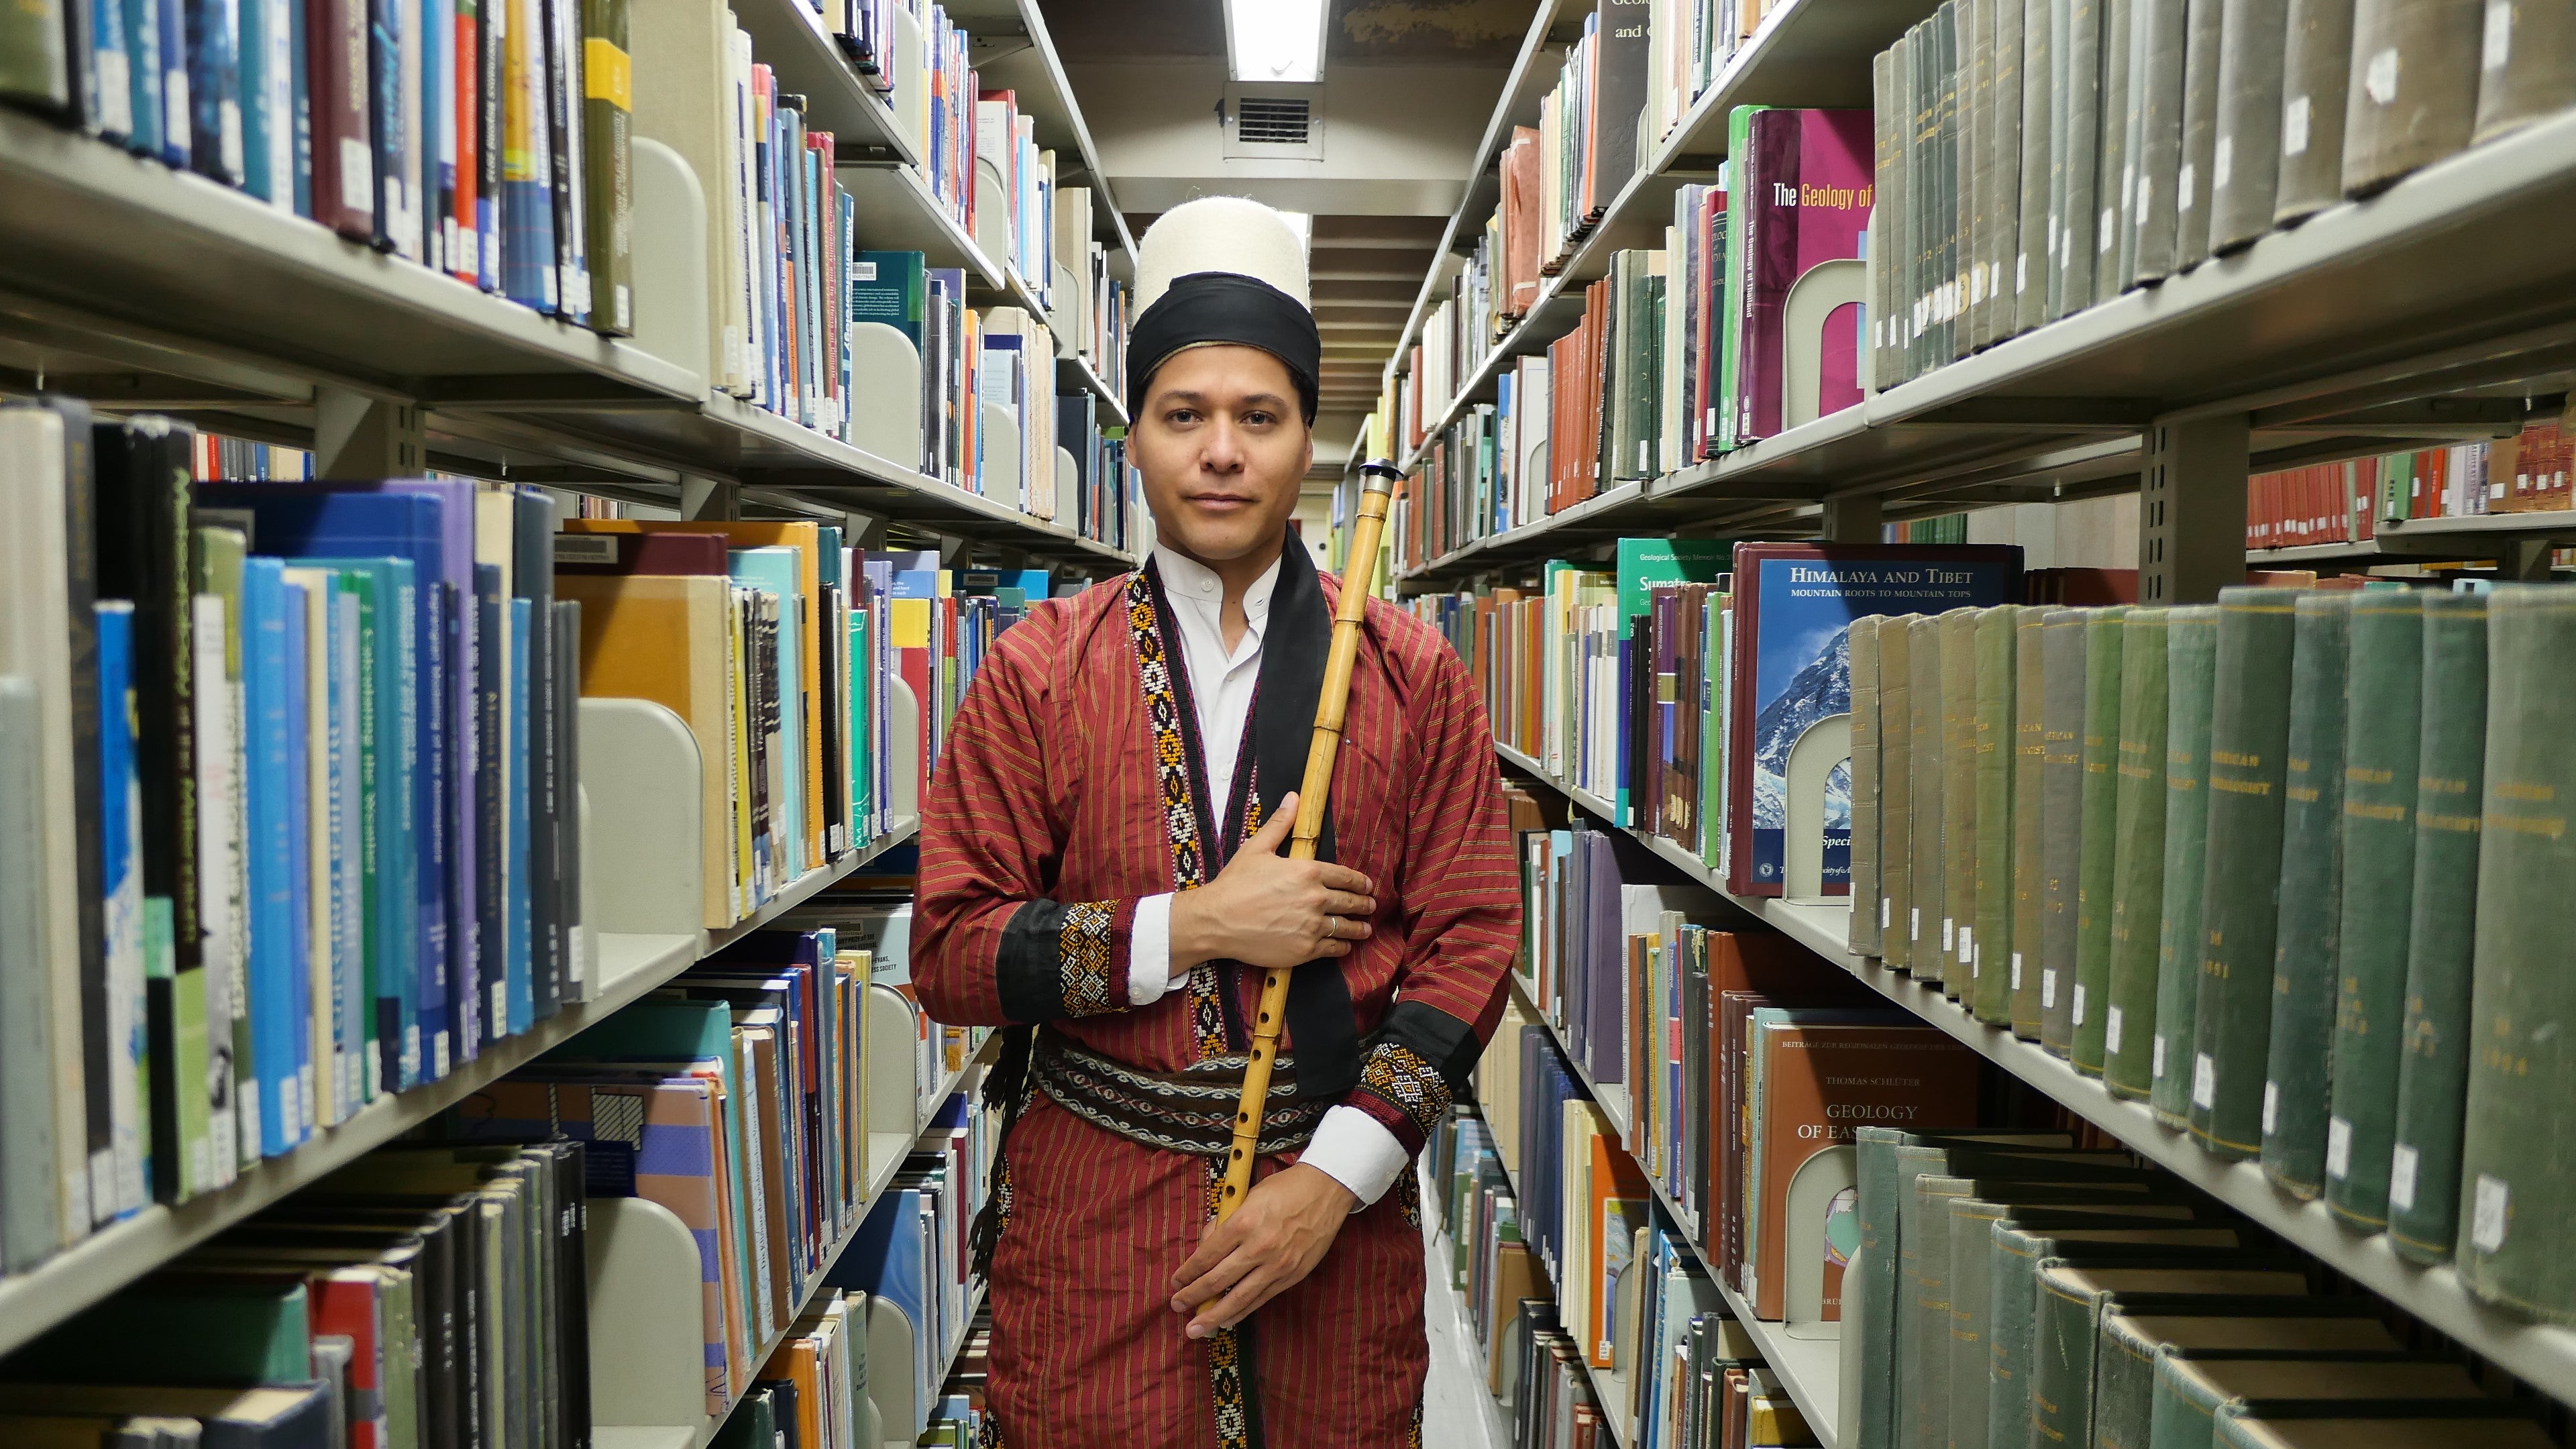 Juan Castrillón holding a ney flute in the library stacks.